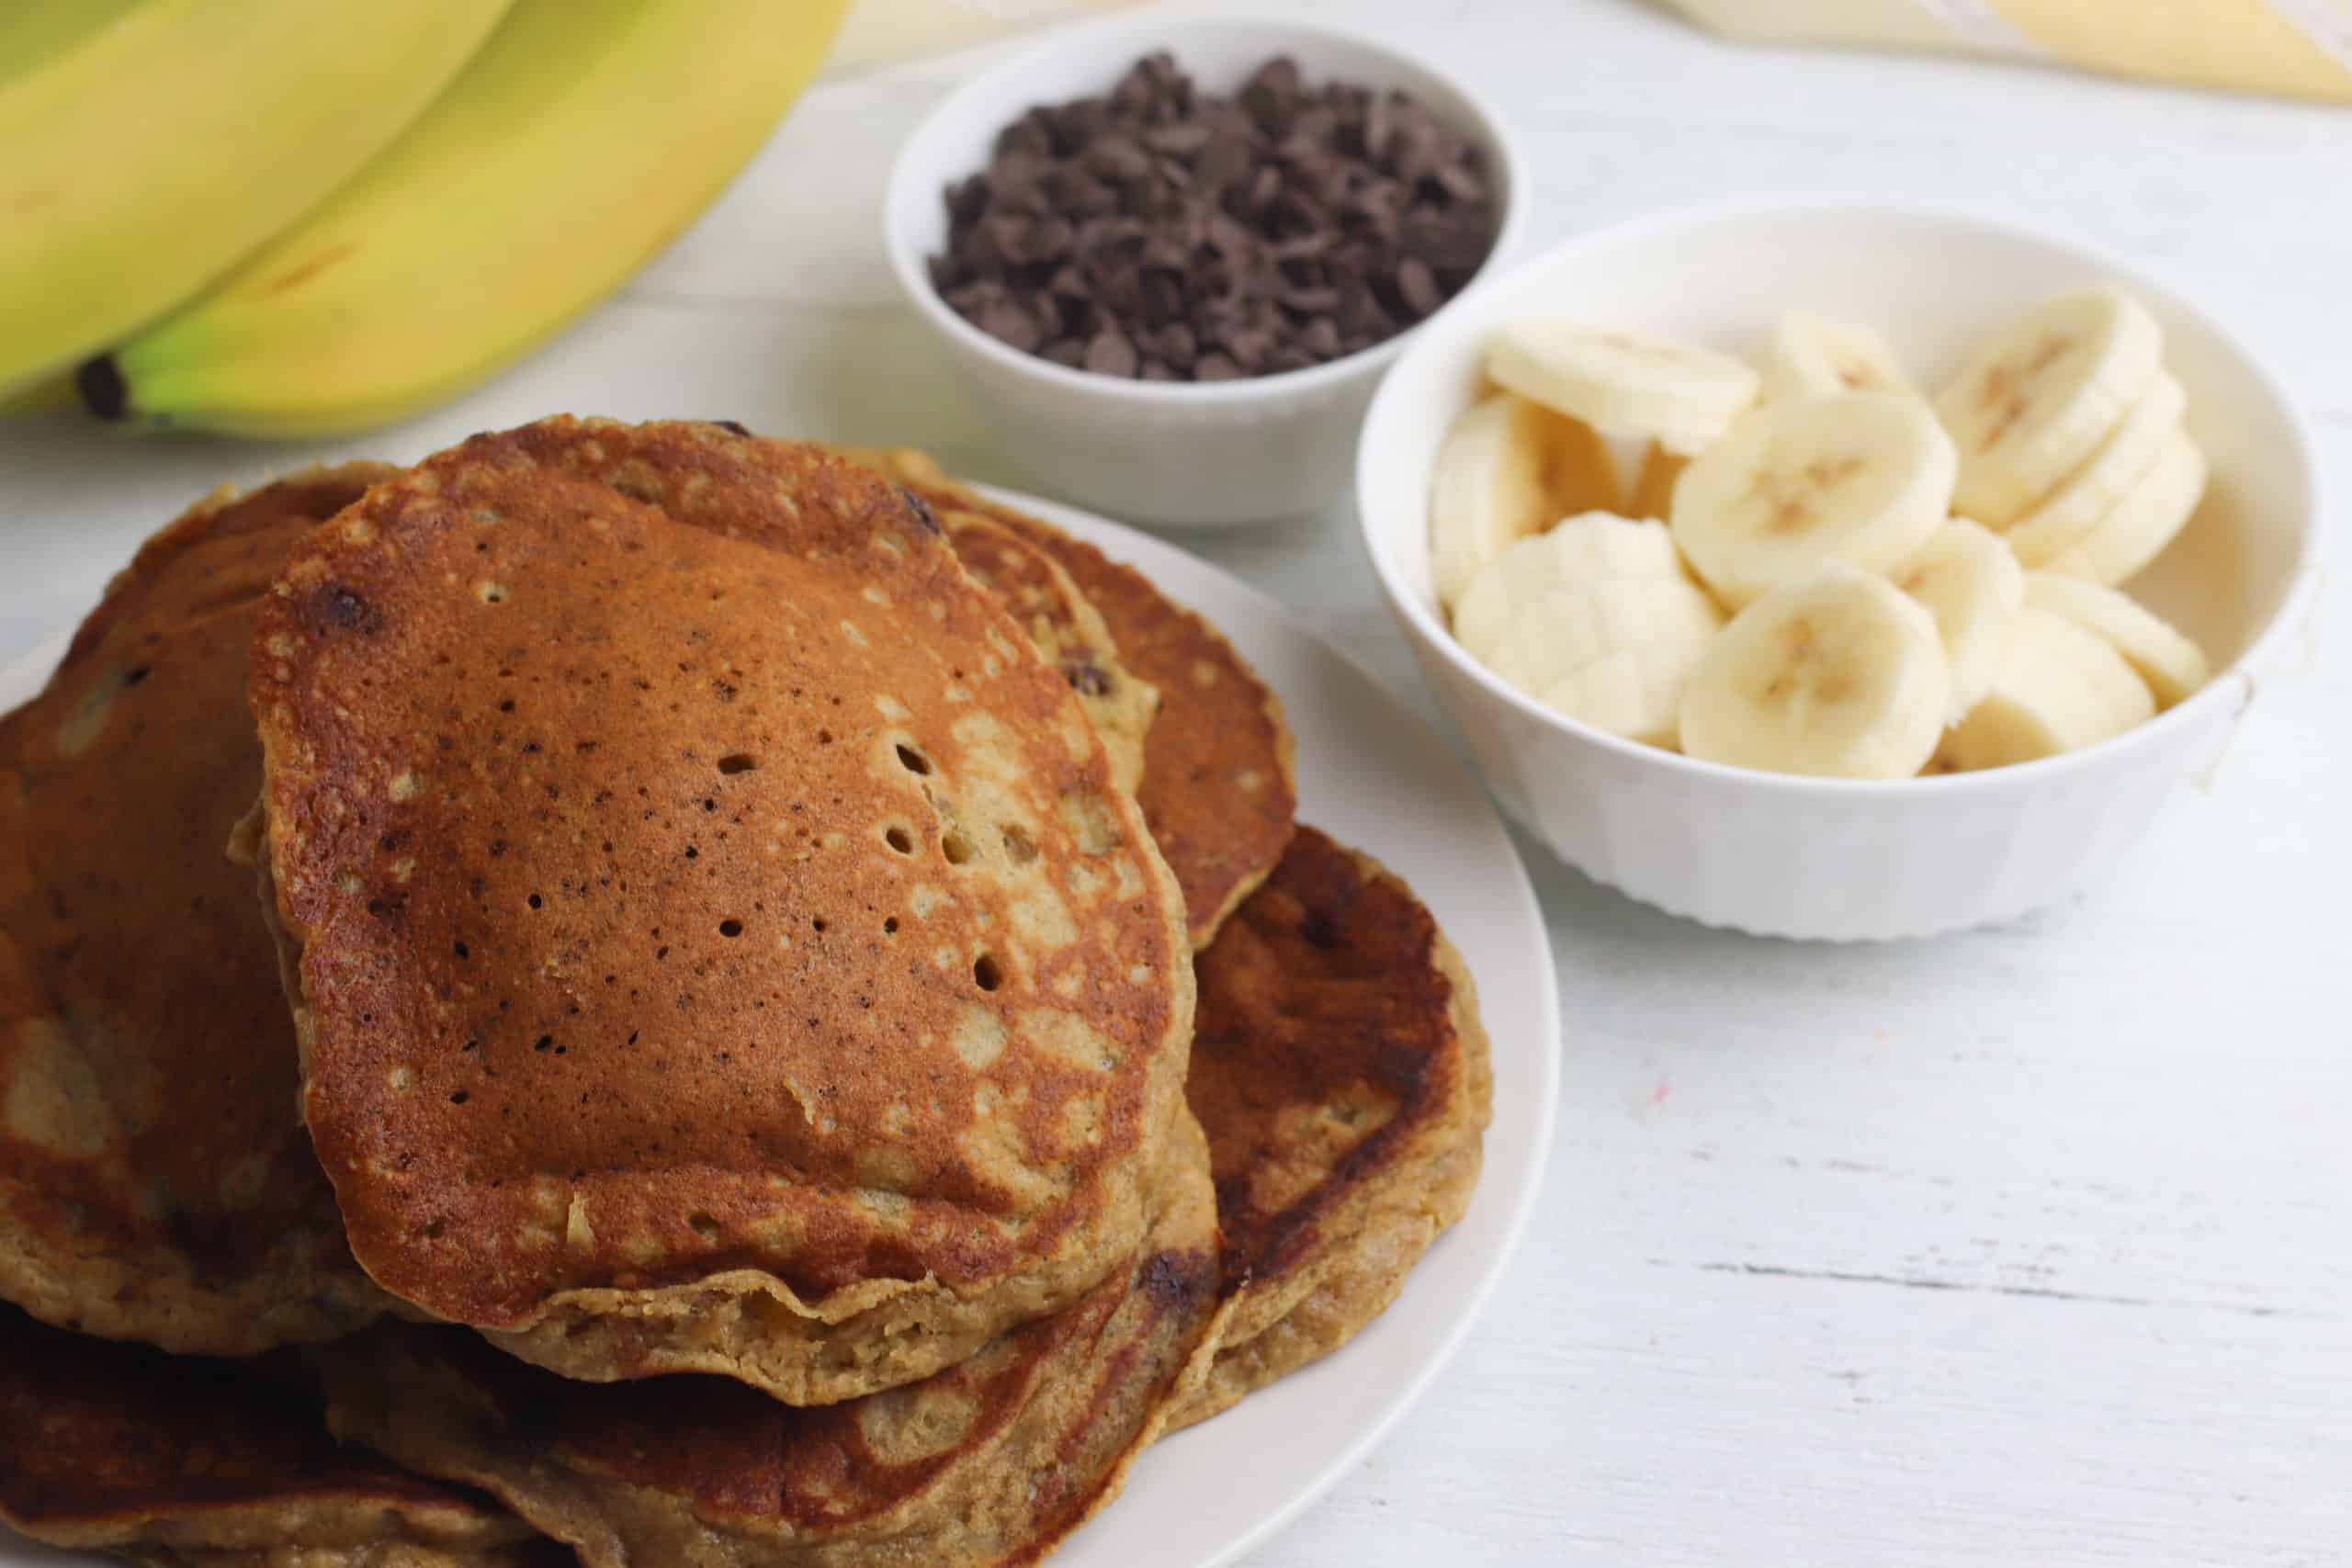 This peanut butter, banana, and chocolate chip oat pancakes recipe is beyond delicious and so filling! Here’s how to make them step-by-step.